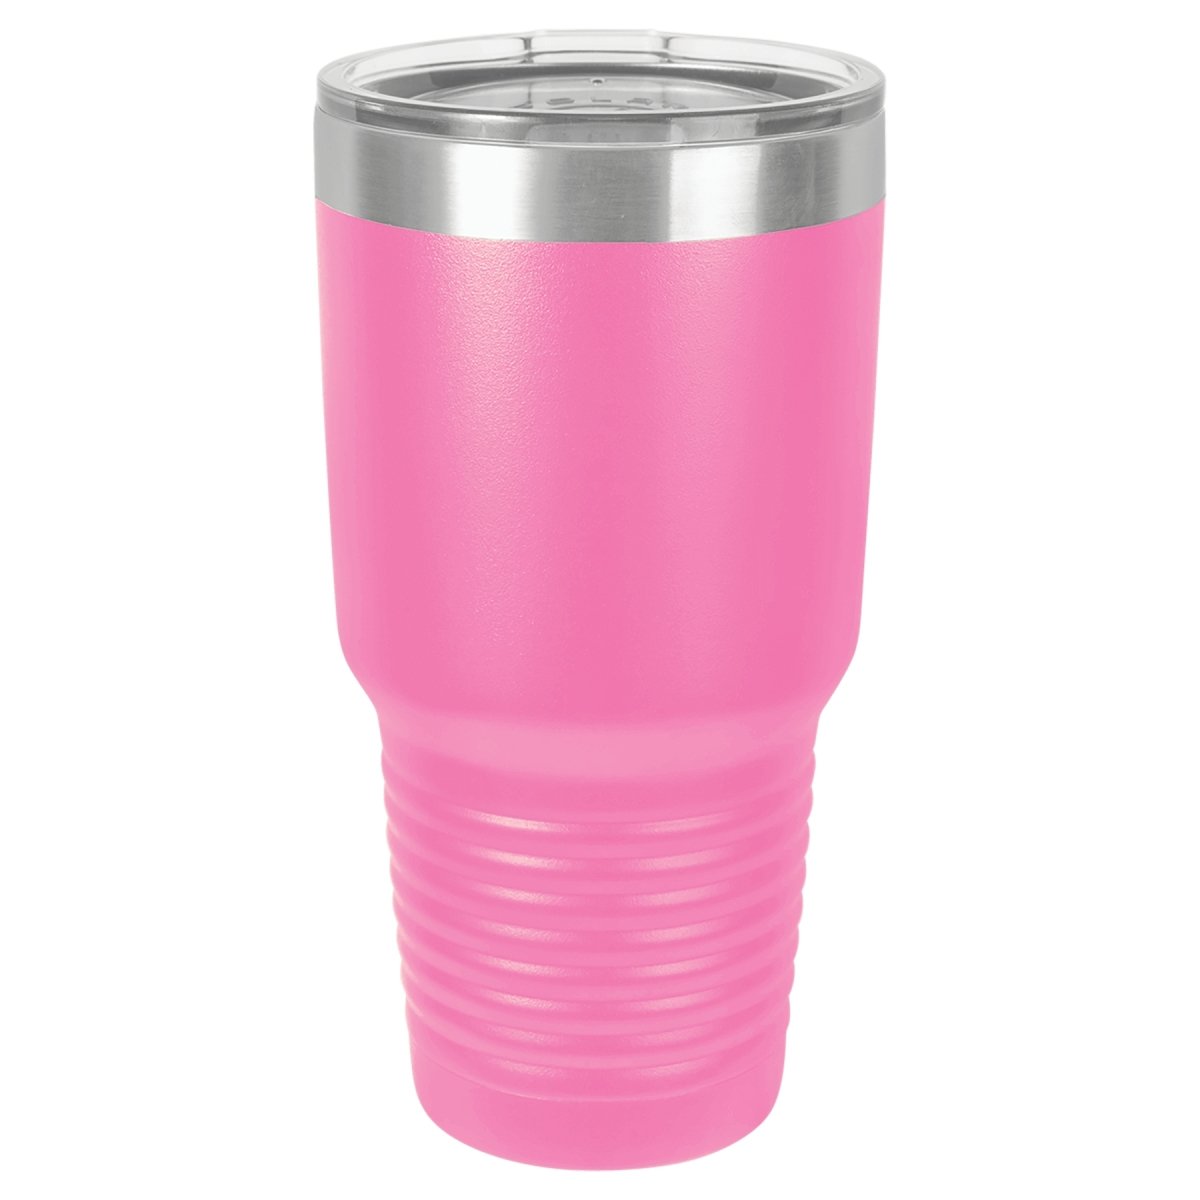 30 oz. Stainless Steel & Power Coated Custom Engraved Polar Camel Tumbler with Lid - The Luua Company